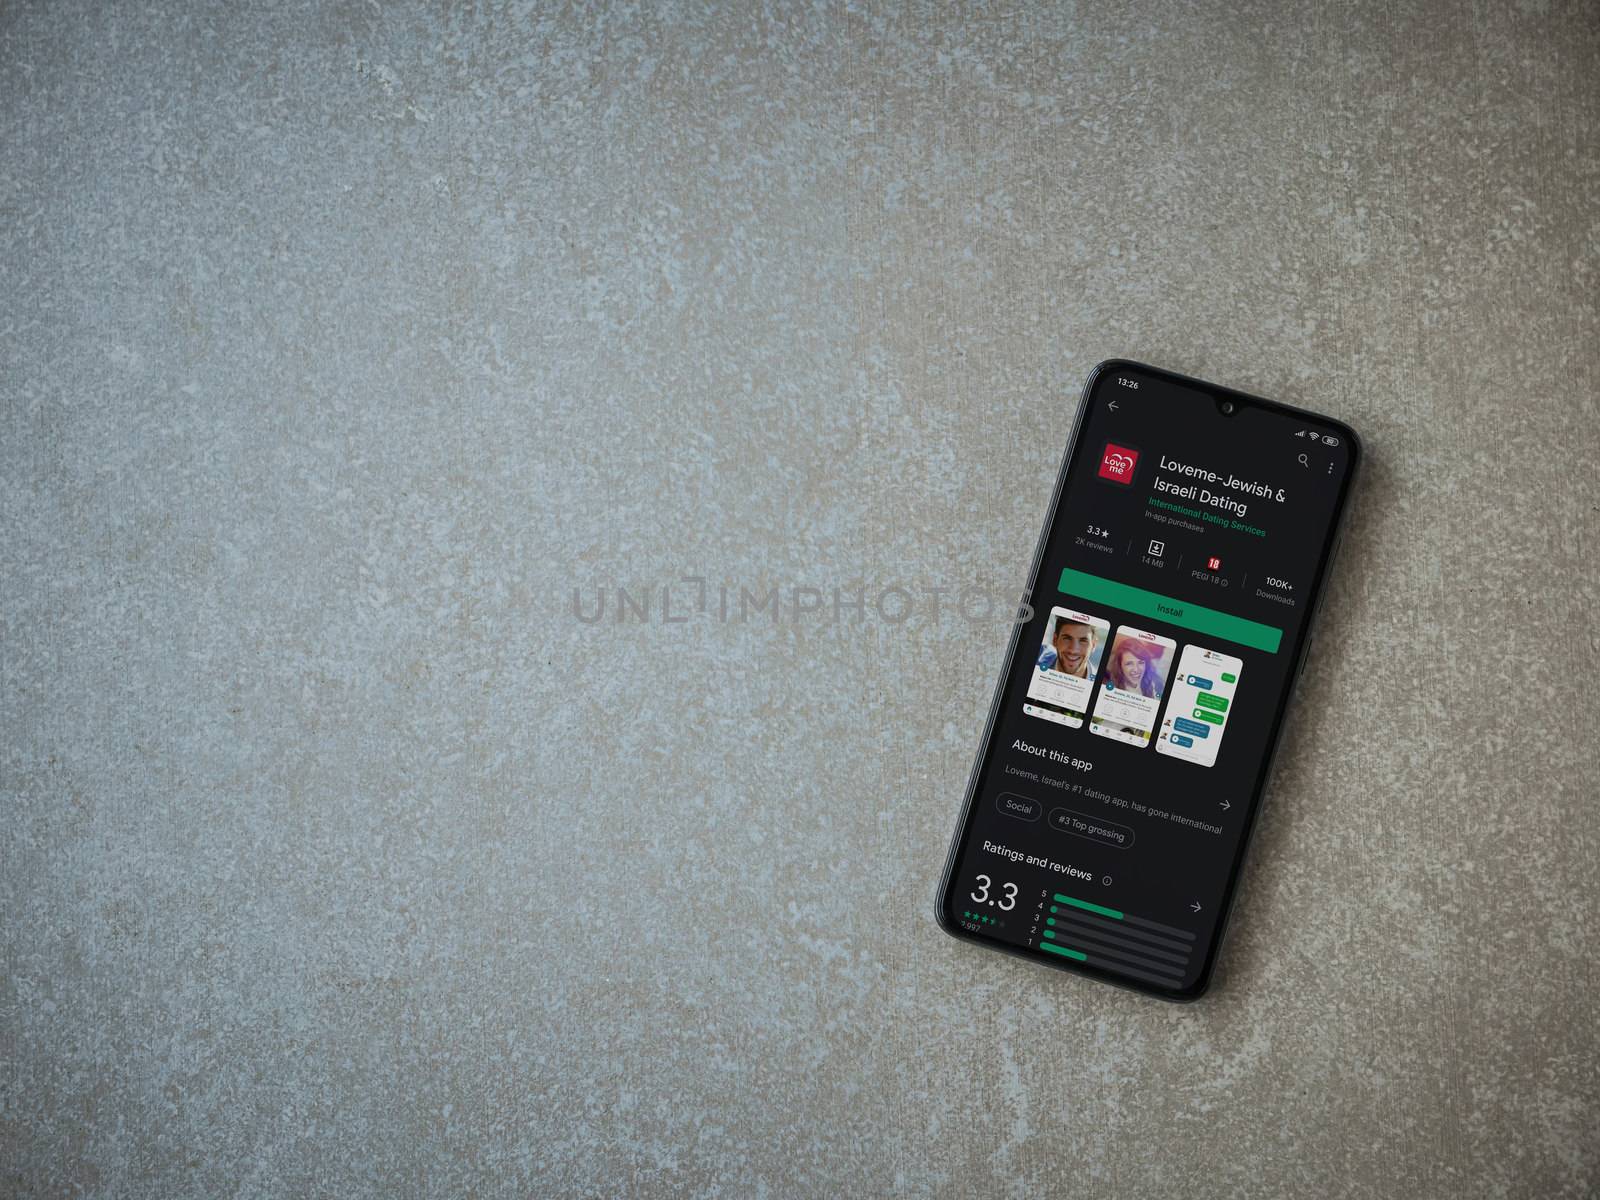 Loveme app play store page on the display of a black mobile smar by wavemovies